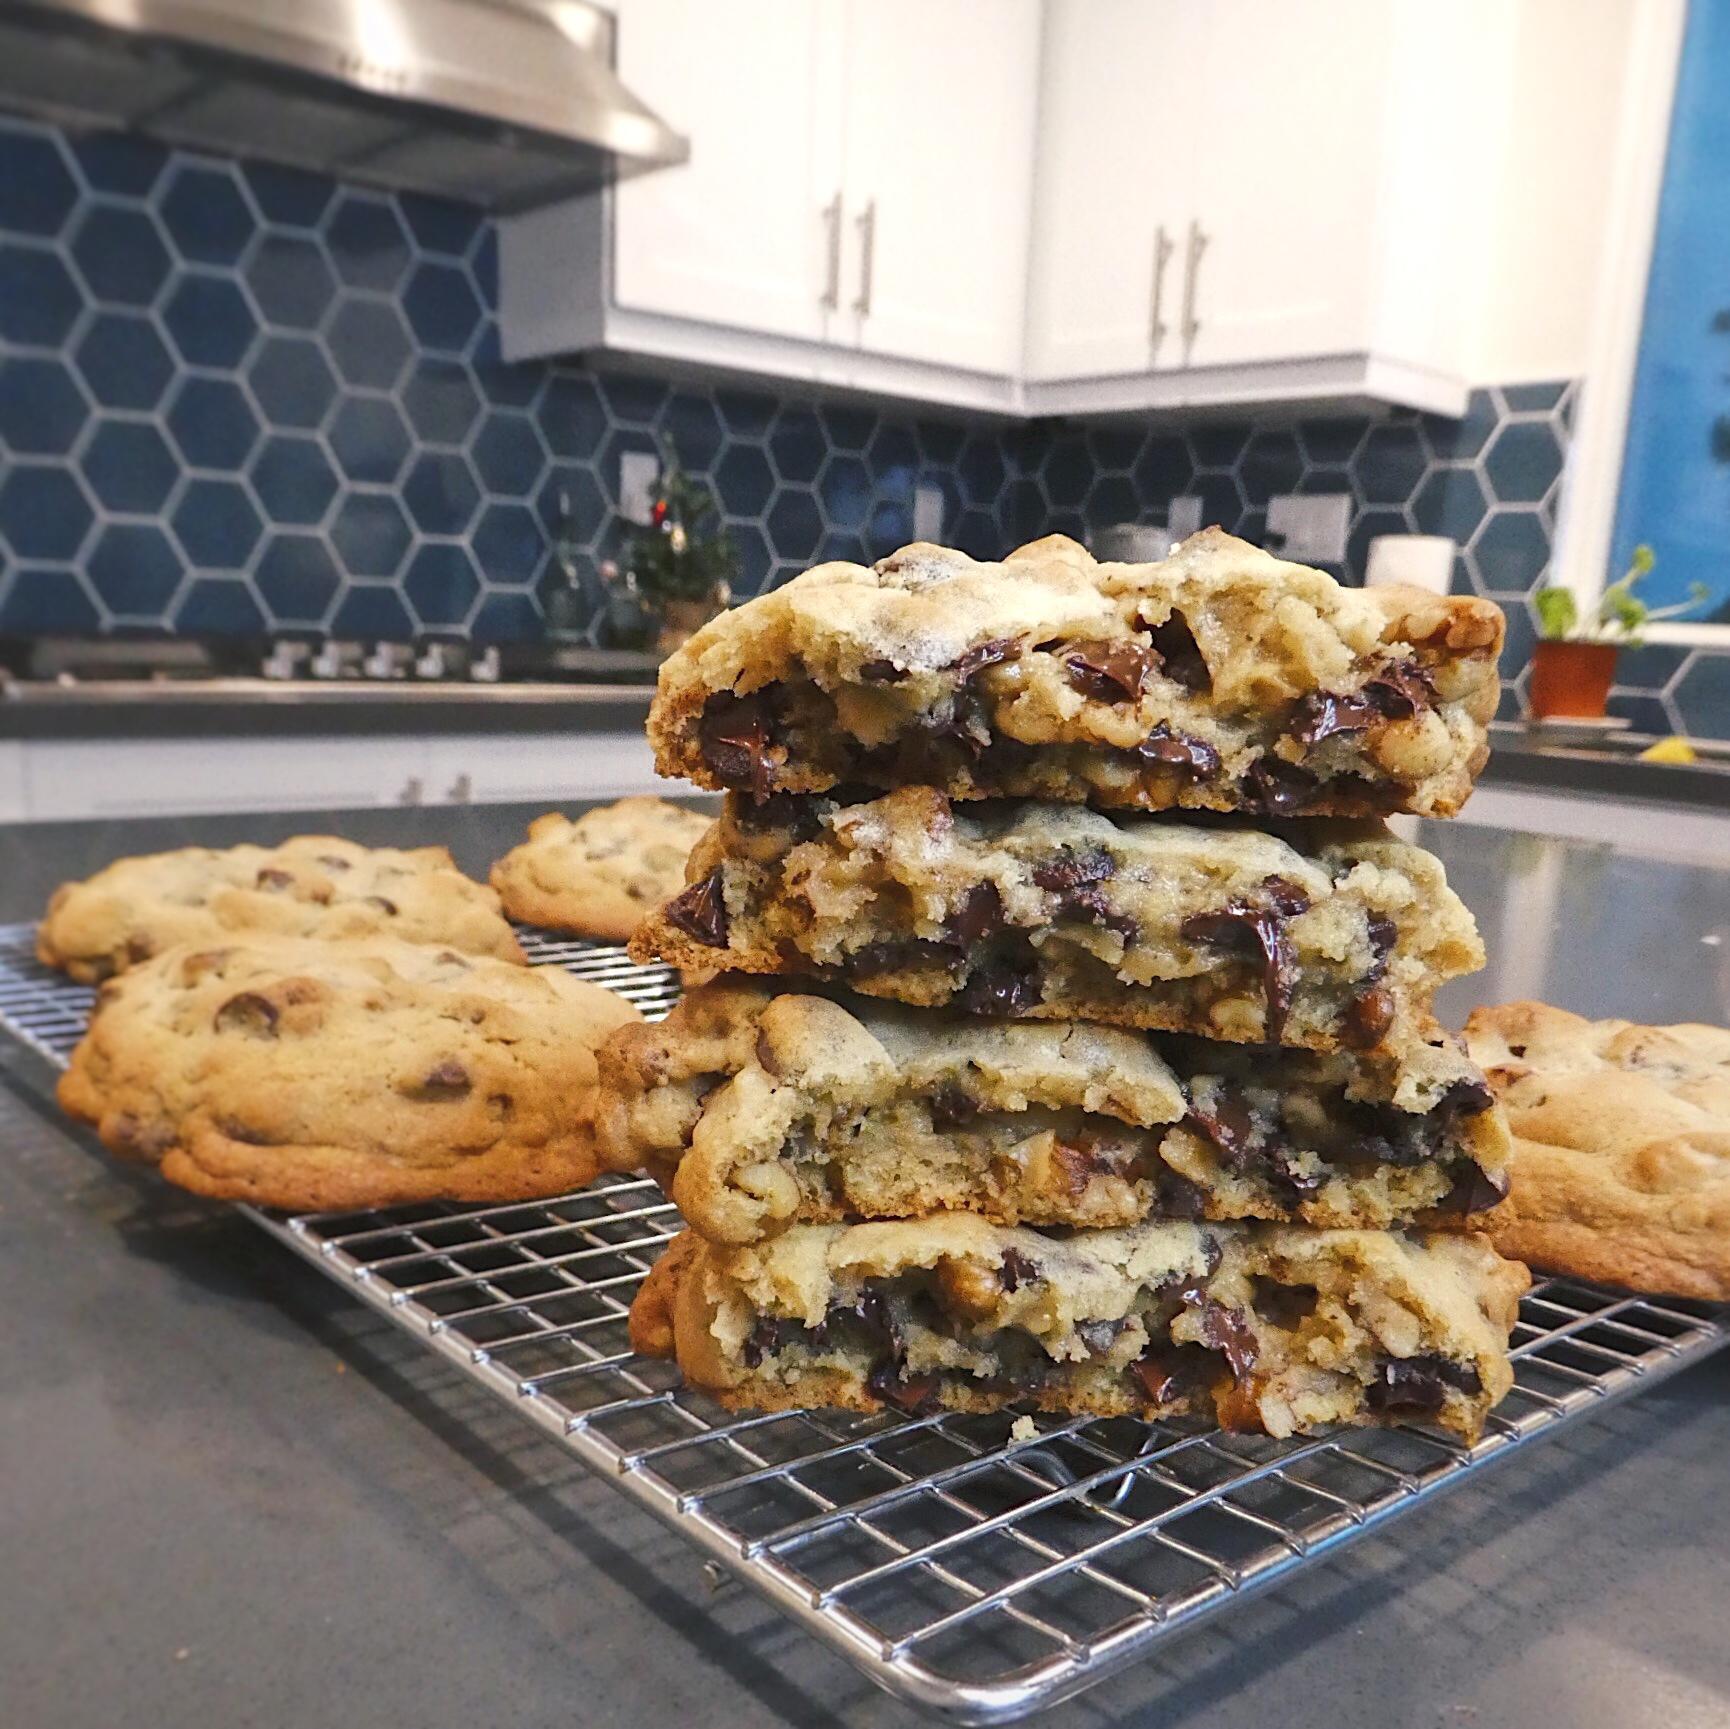 BAKE ME: Holiday Compost Cookies by New Jersey foodie blogger What's For Dinner Esq.